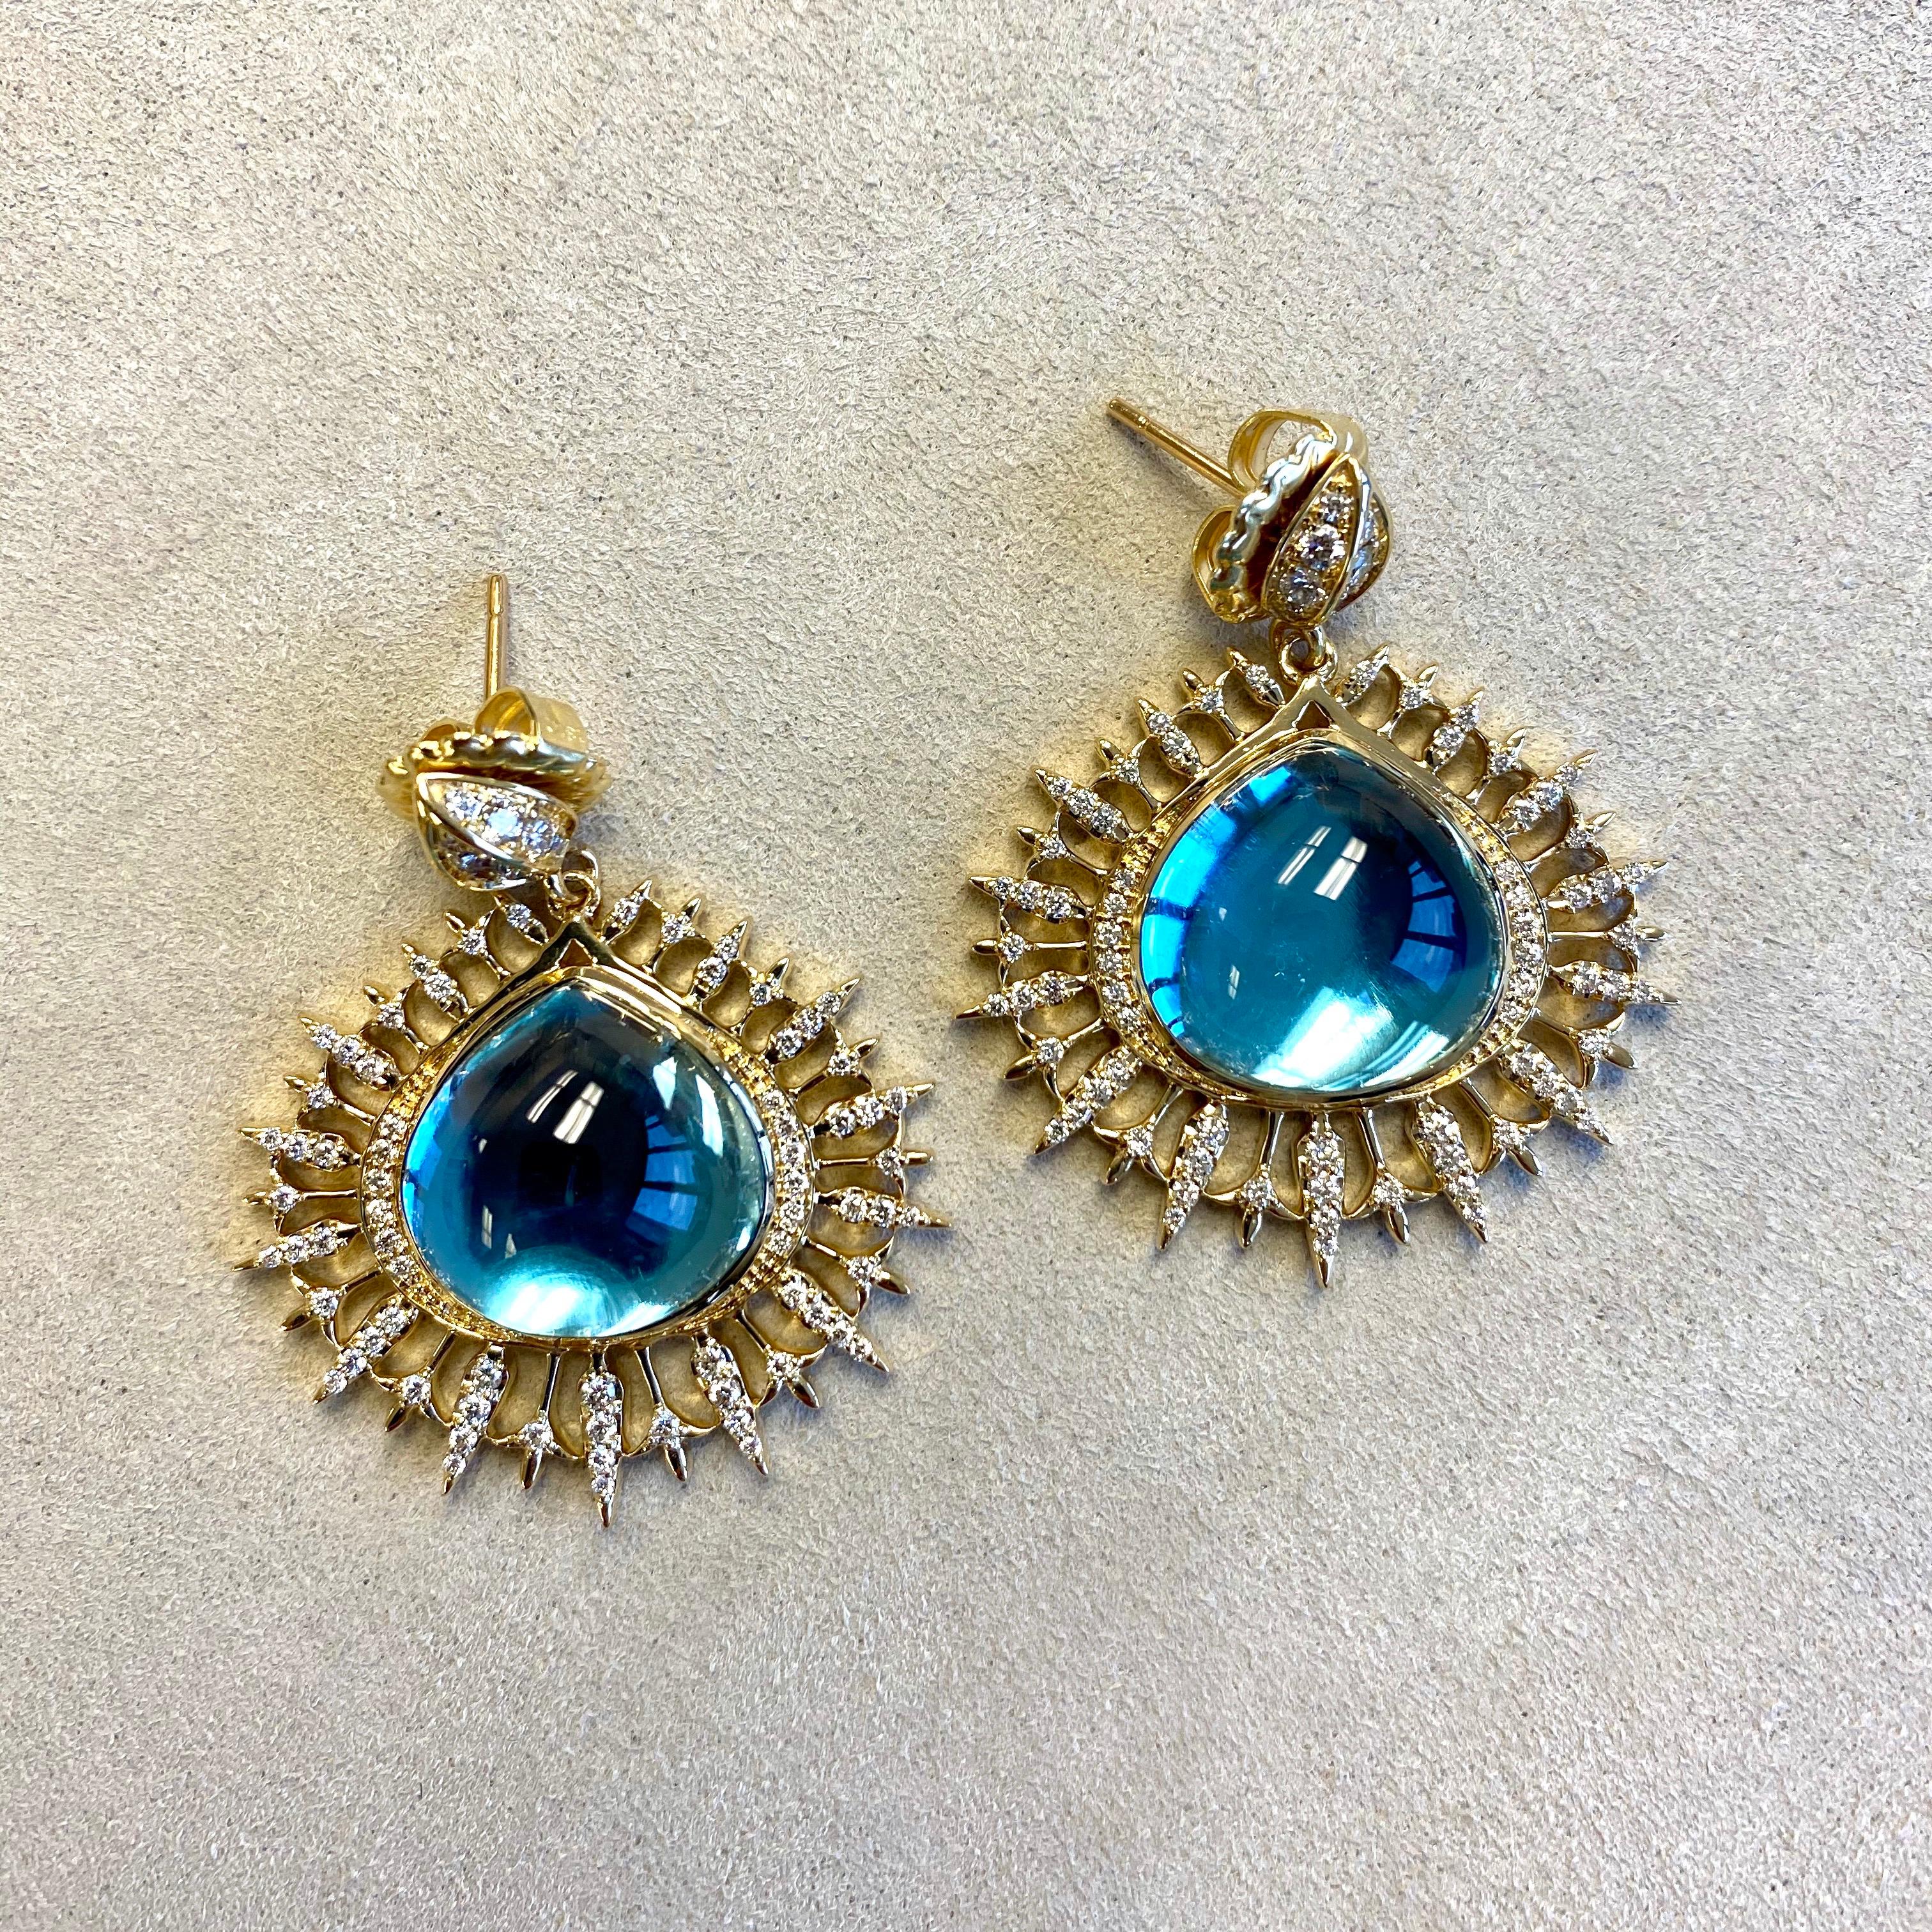 Created in 18 karat yellow gold
Blue Topaz 34 cts approx
Champagne Diamonds 1.10 cts approx
Limited Edition


About the Designers

Drawing inspiration from little things, Dharmesh & Namrata Kothari have created an extraordinary and refreshing